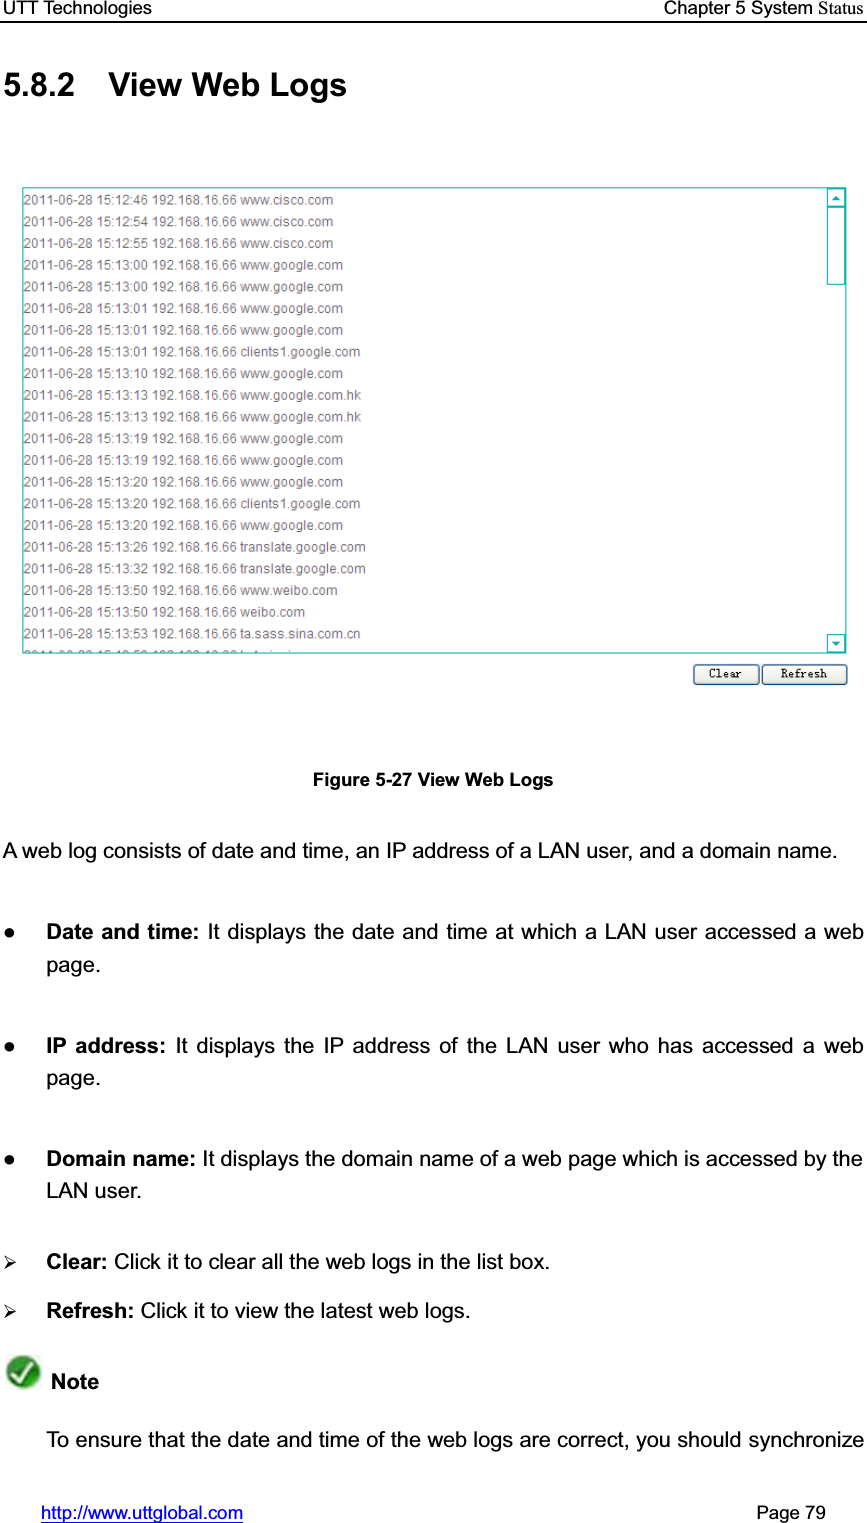 UTT Technologies    Chapter 5 System Statushttp://www.uttglobal.com                                                       Page 79 5.8.2  View Web Logs Figure 5-27 View Web Logs A web log consists of date and time, an IP address of a LAN user, and a domain name.   ƔDate and time: It displays the date and time at which a LAN user accessed a web page. ƔIP address: It displays the IP address of the LAN user who has accessed a web page.  ƔDomain name: It displays the domain name of a web page which is accessed by the LAN user. ¾Clear: Click it to clear all the web logs in the list box.¾Refresh: Click it to view the latest web logs.Note To ensure that the date and time of the web logs are correct, you should synchronize 